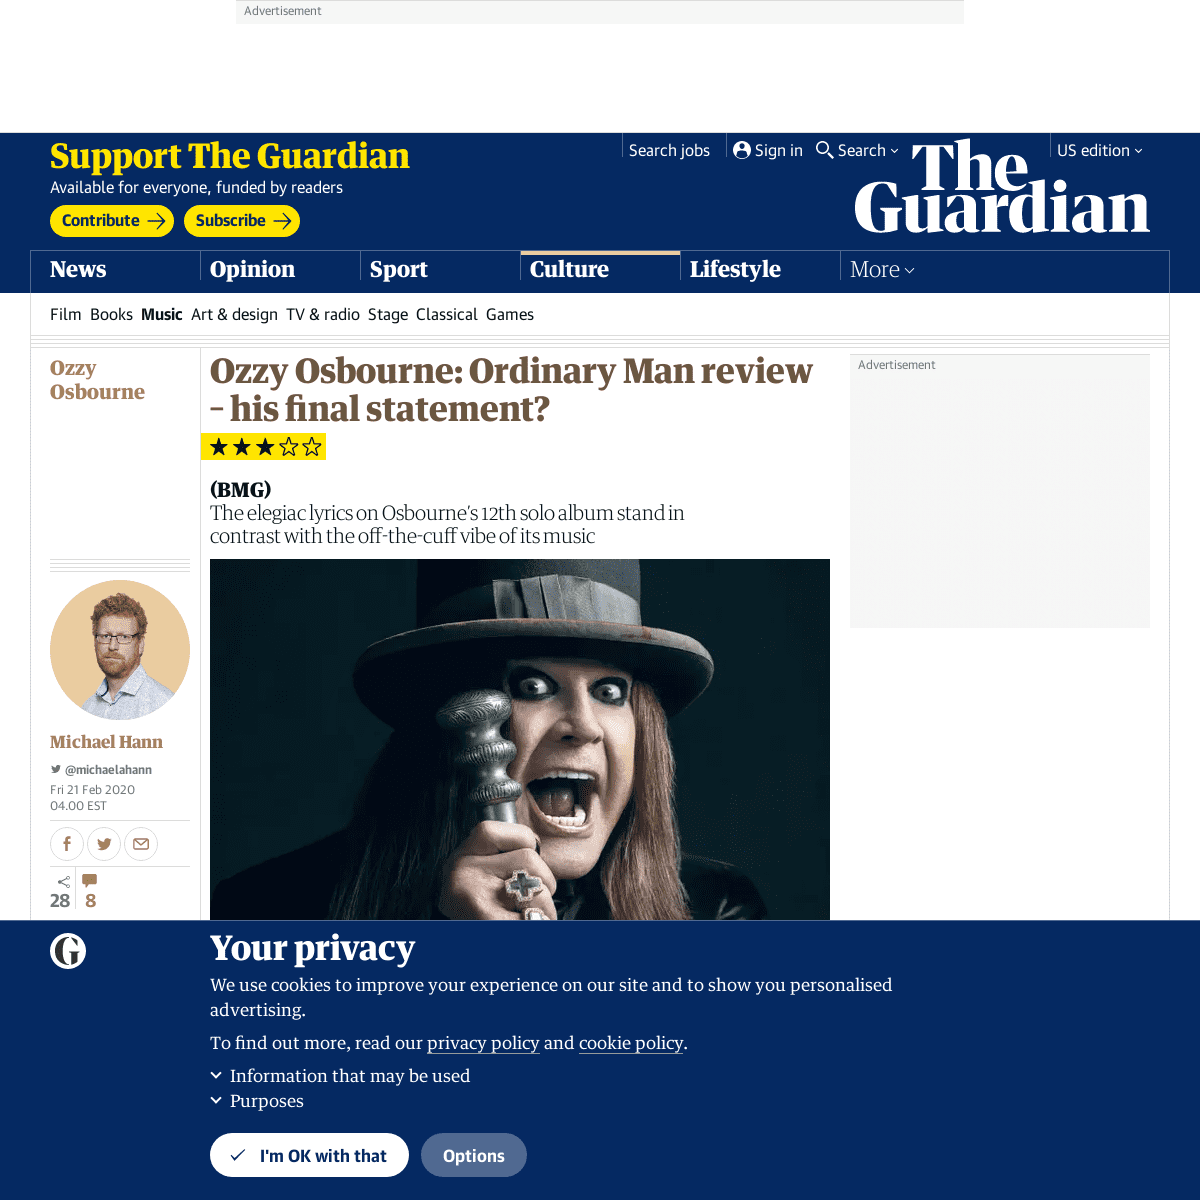 A complete backup of www.theguardian.com/music/2020/feb/21/ozzy-osbourne-ordinary-man-review-bmg